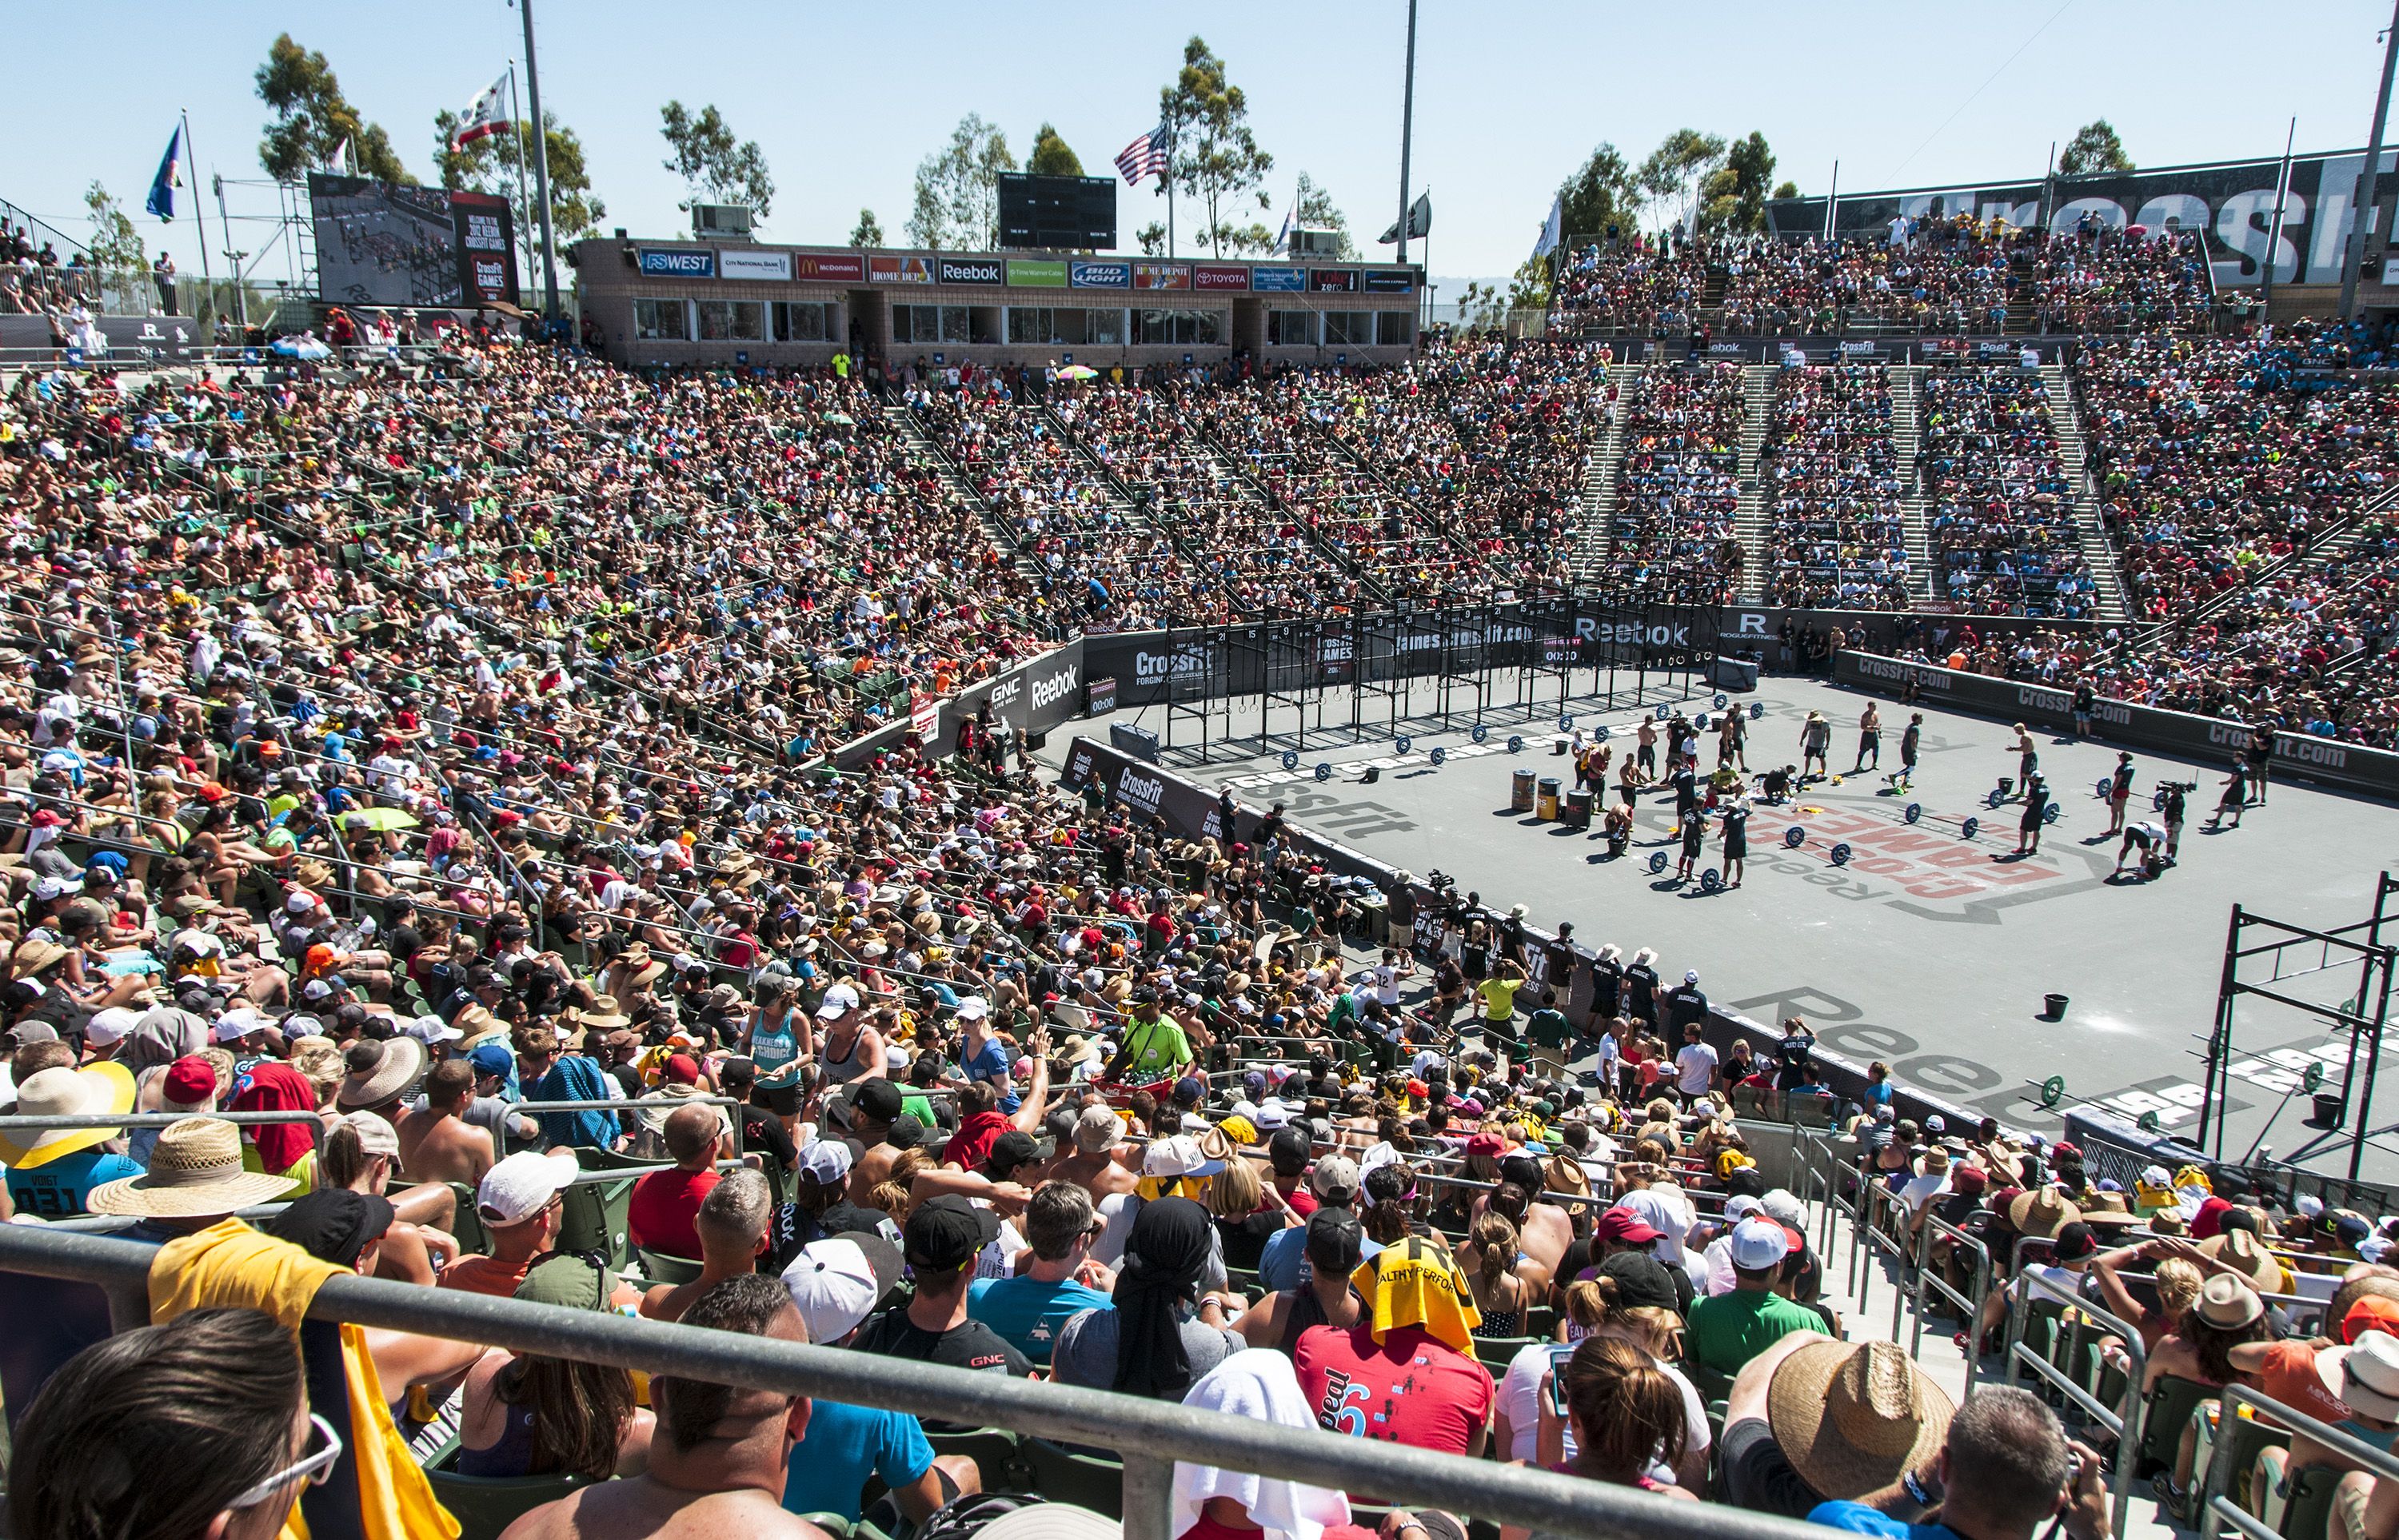 CROSSFIT MASSILLON. The 2017 Reebok CrossFit Games and $1 Million